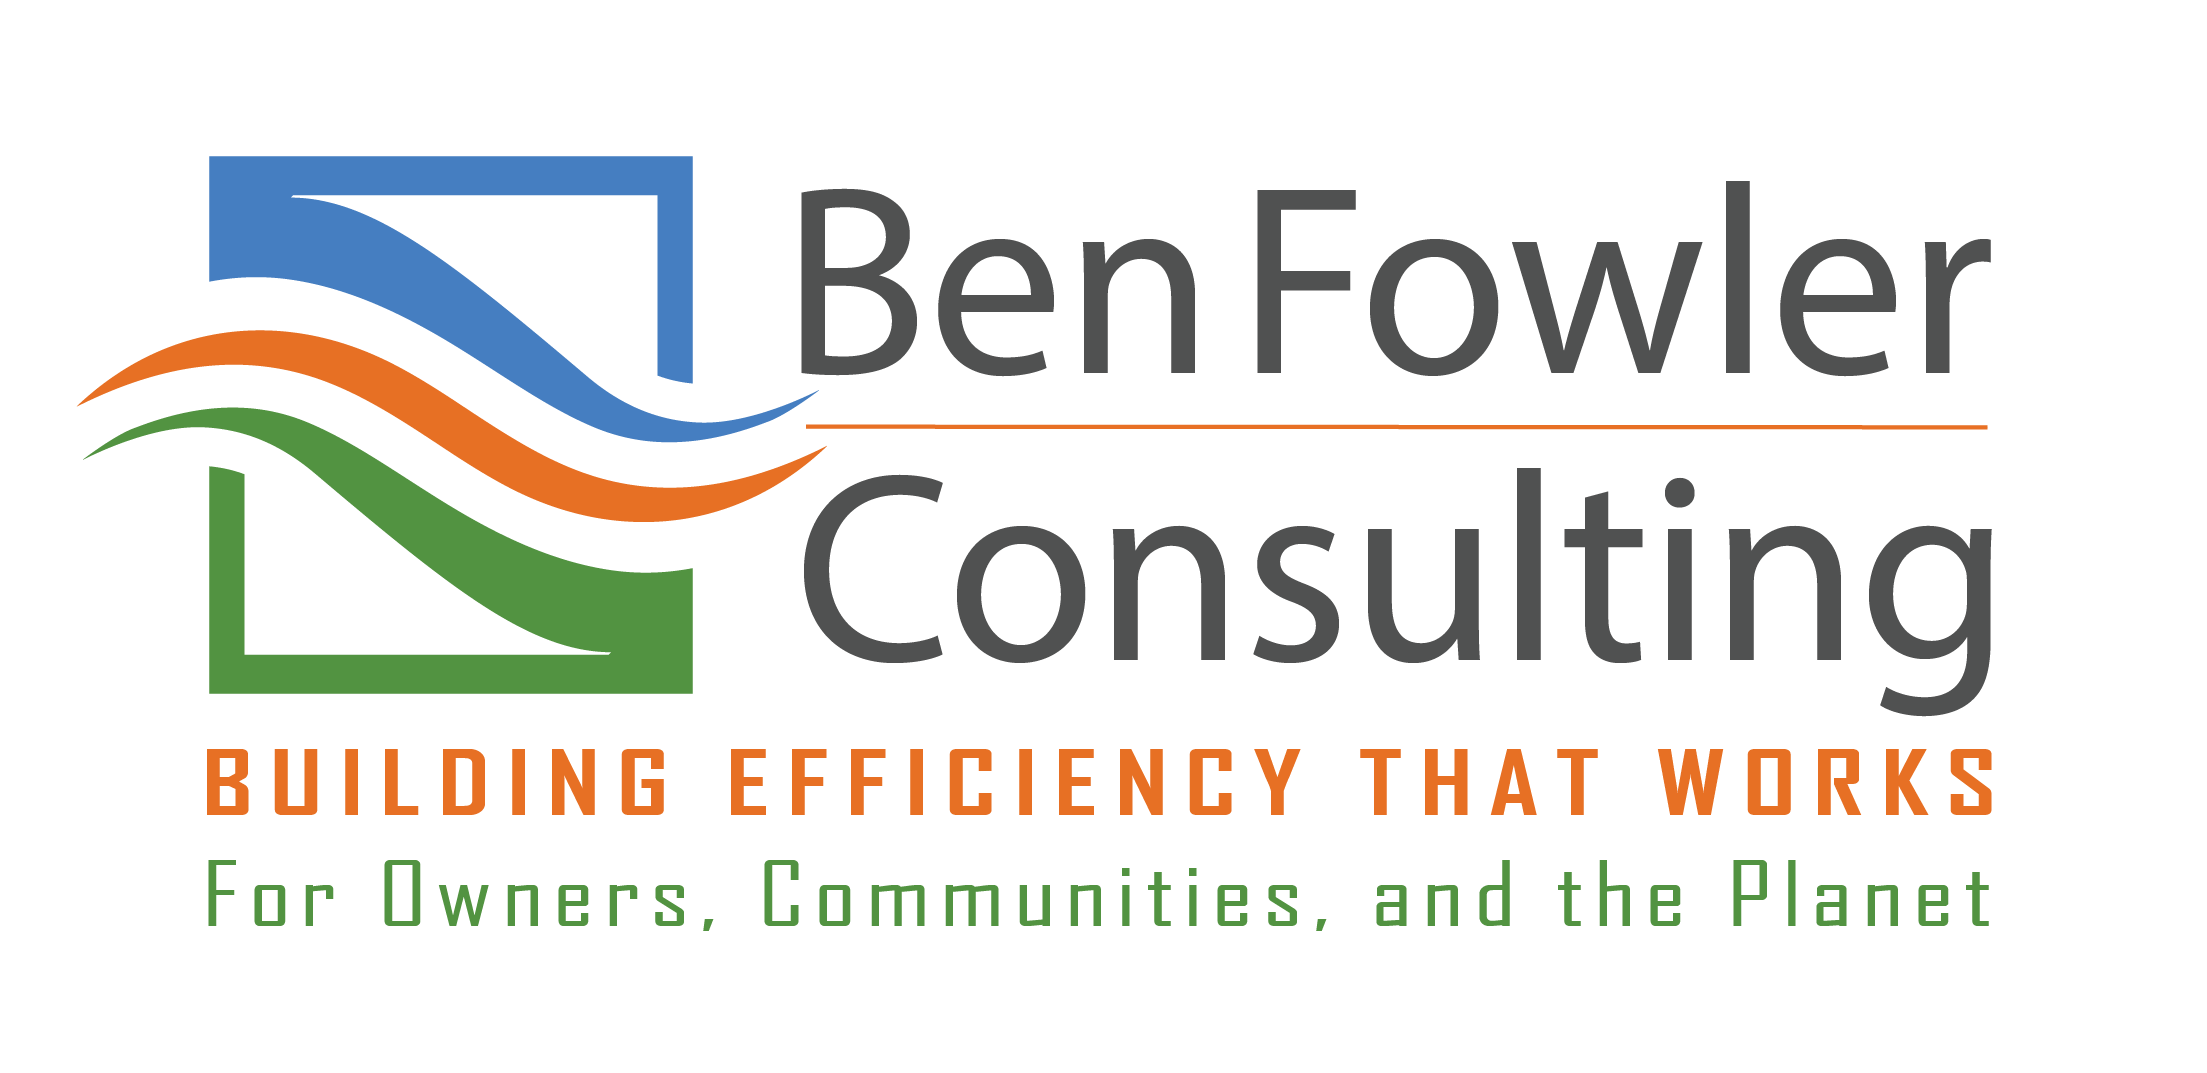 Ben Fowler Consulting